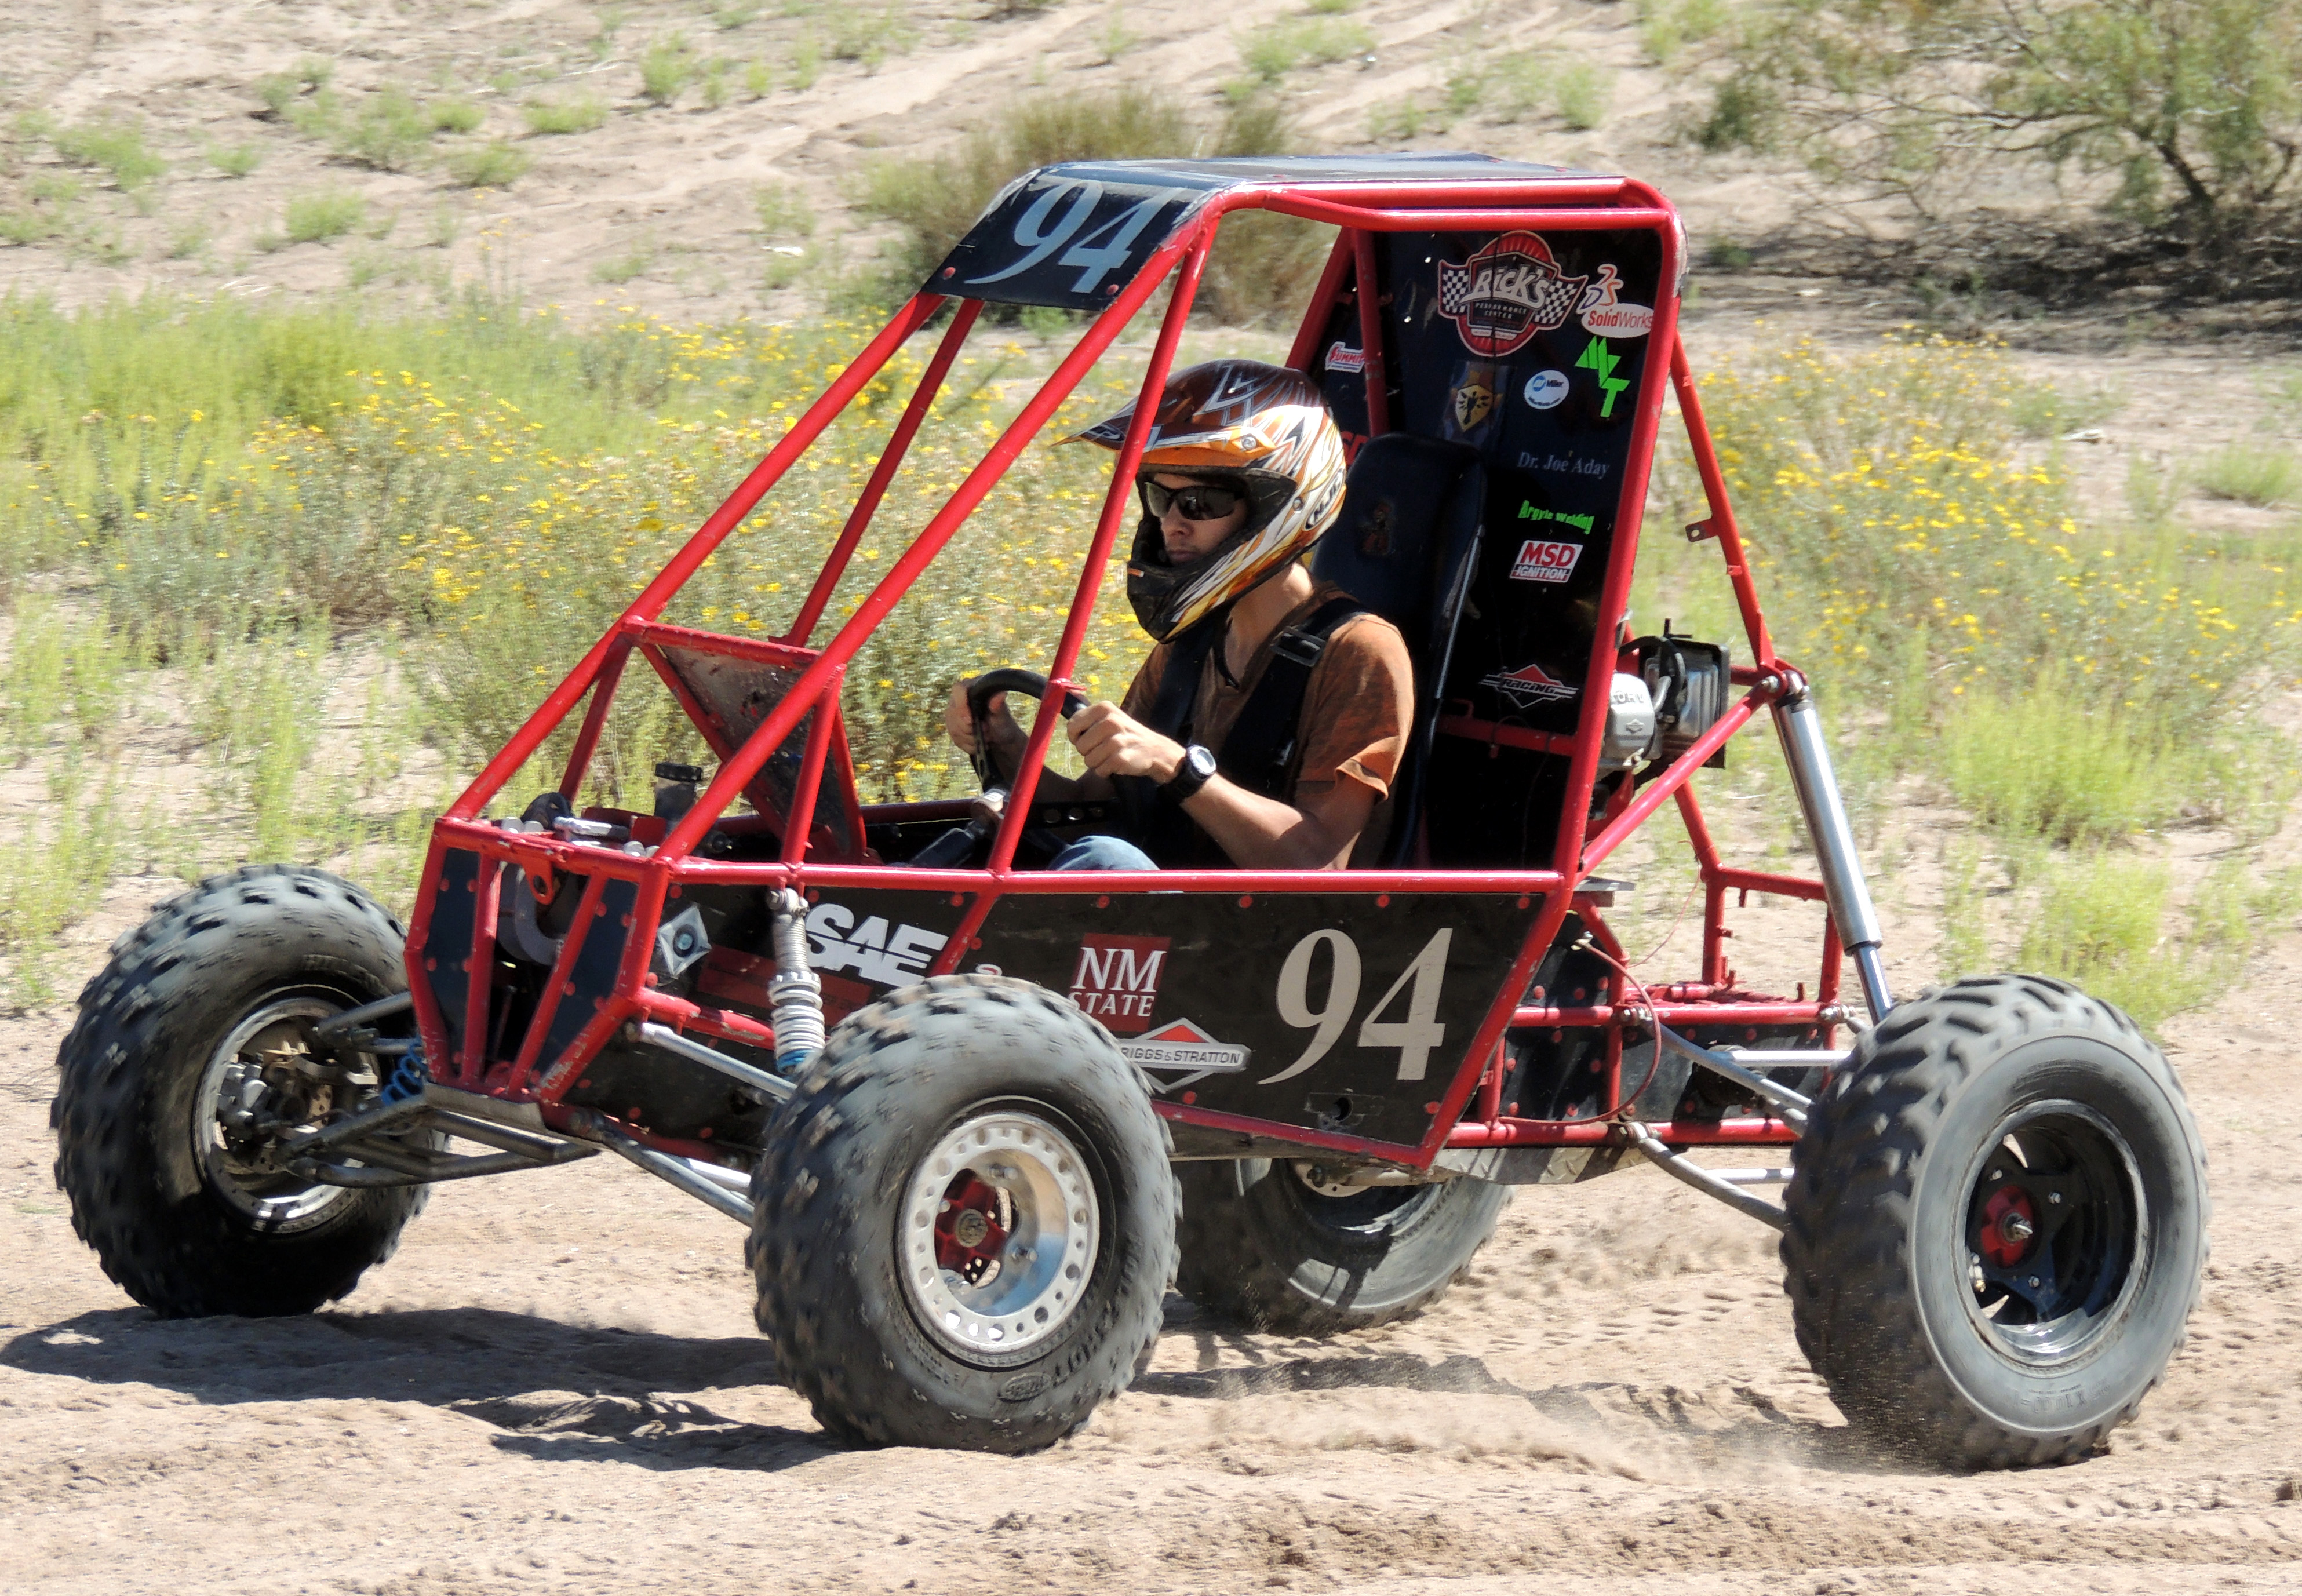 NMSU students ready cars for mini baja competition | Article | NMSU ...